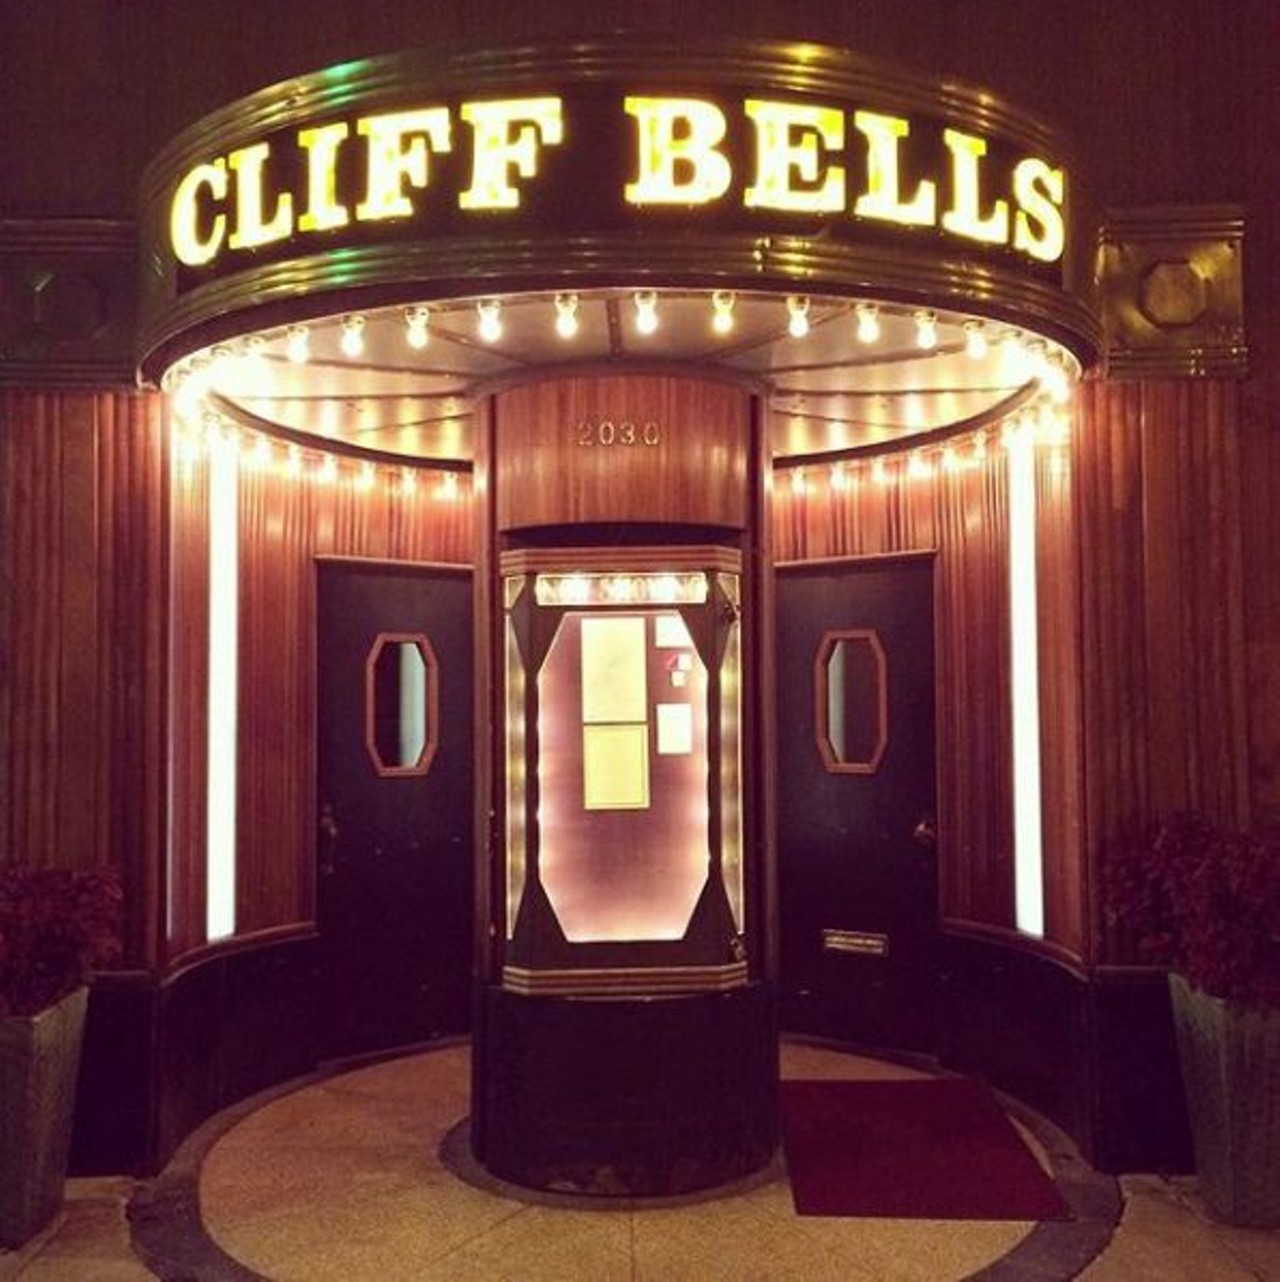 Cliff Bell&#146;s
2030 Park Ave., Detroit, MI 48226
If the Art Deco interior isn&#146;t enough to make you swoon, Cliff Bell&#146;s nightly jazz performances will definitely leave you feeling as though you took a step back in time.
Photo courtesy of @lightsilove